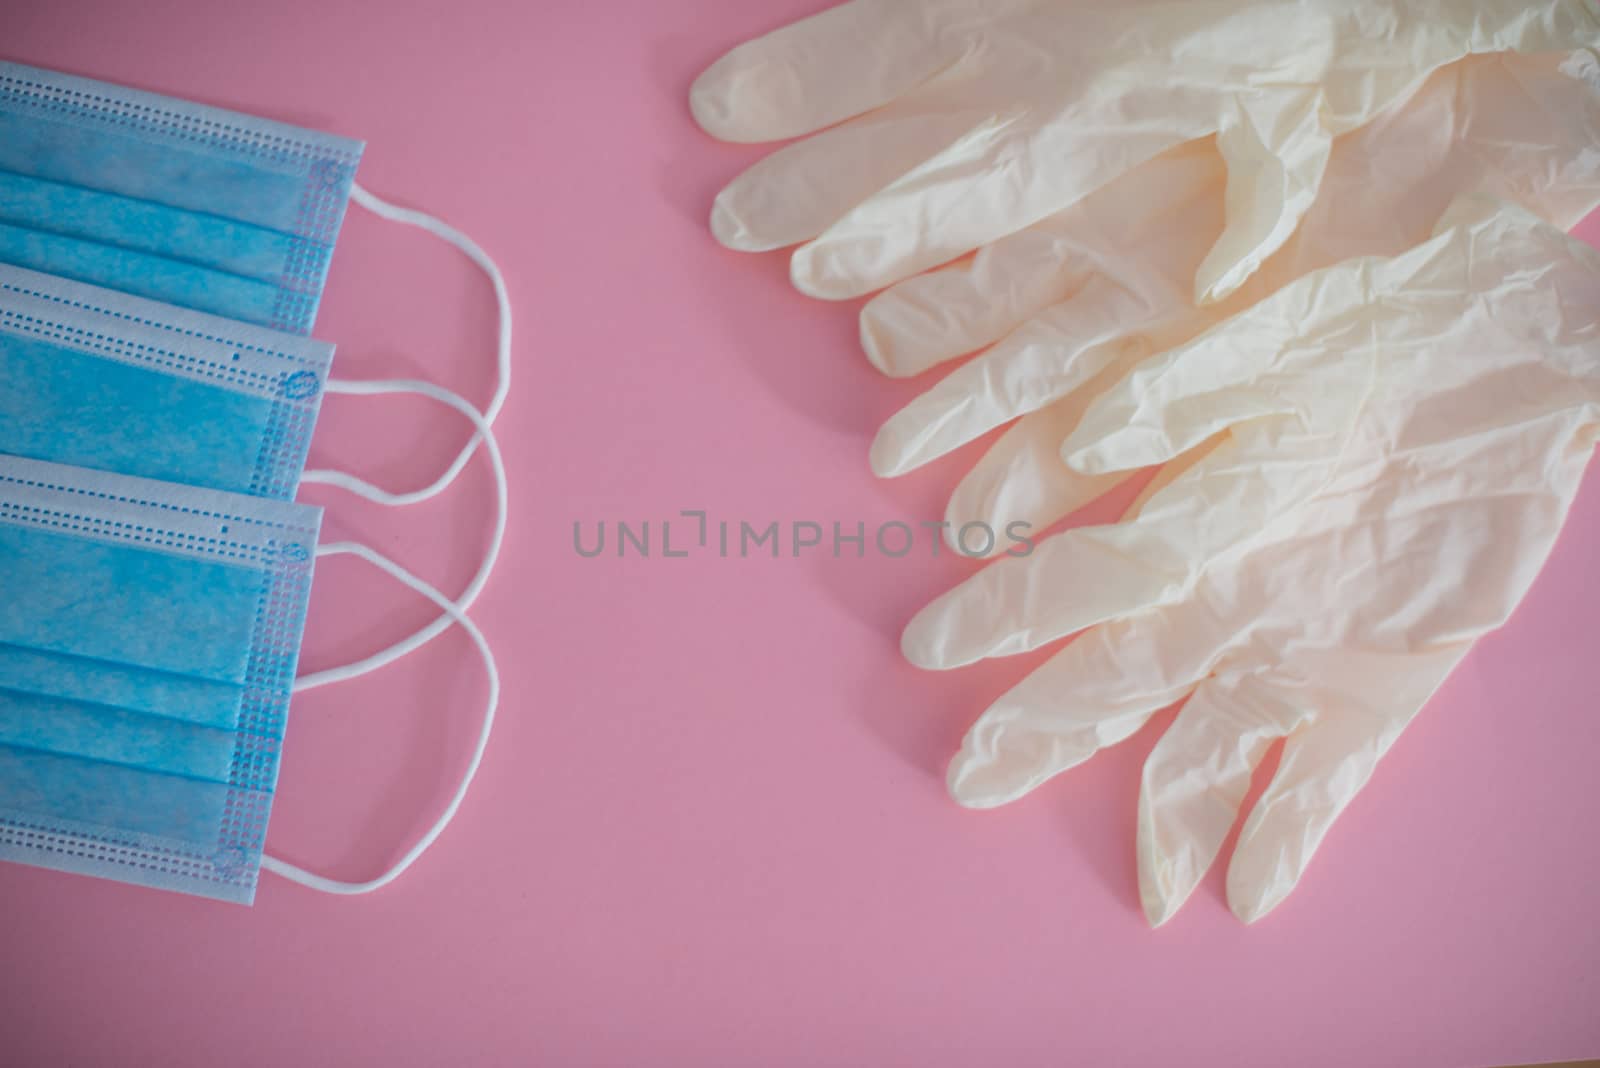 Mask and latex gloves isolated against colorful background by rushay